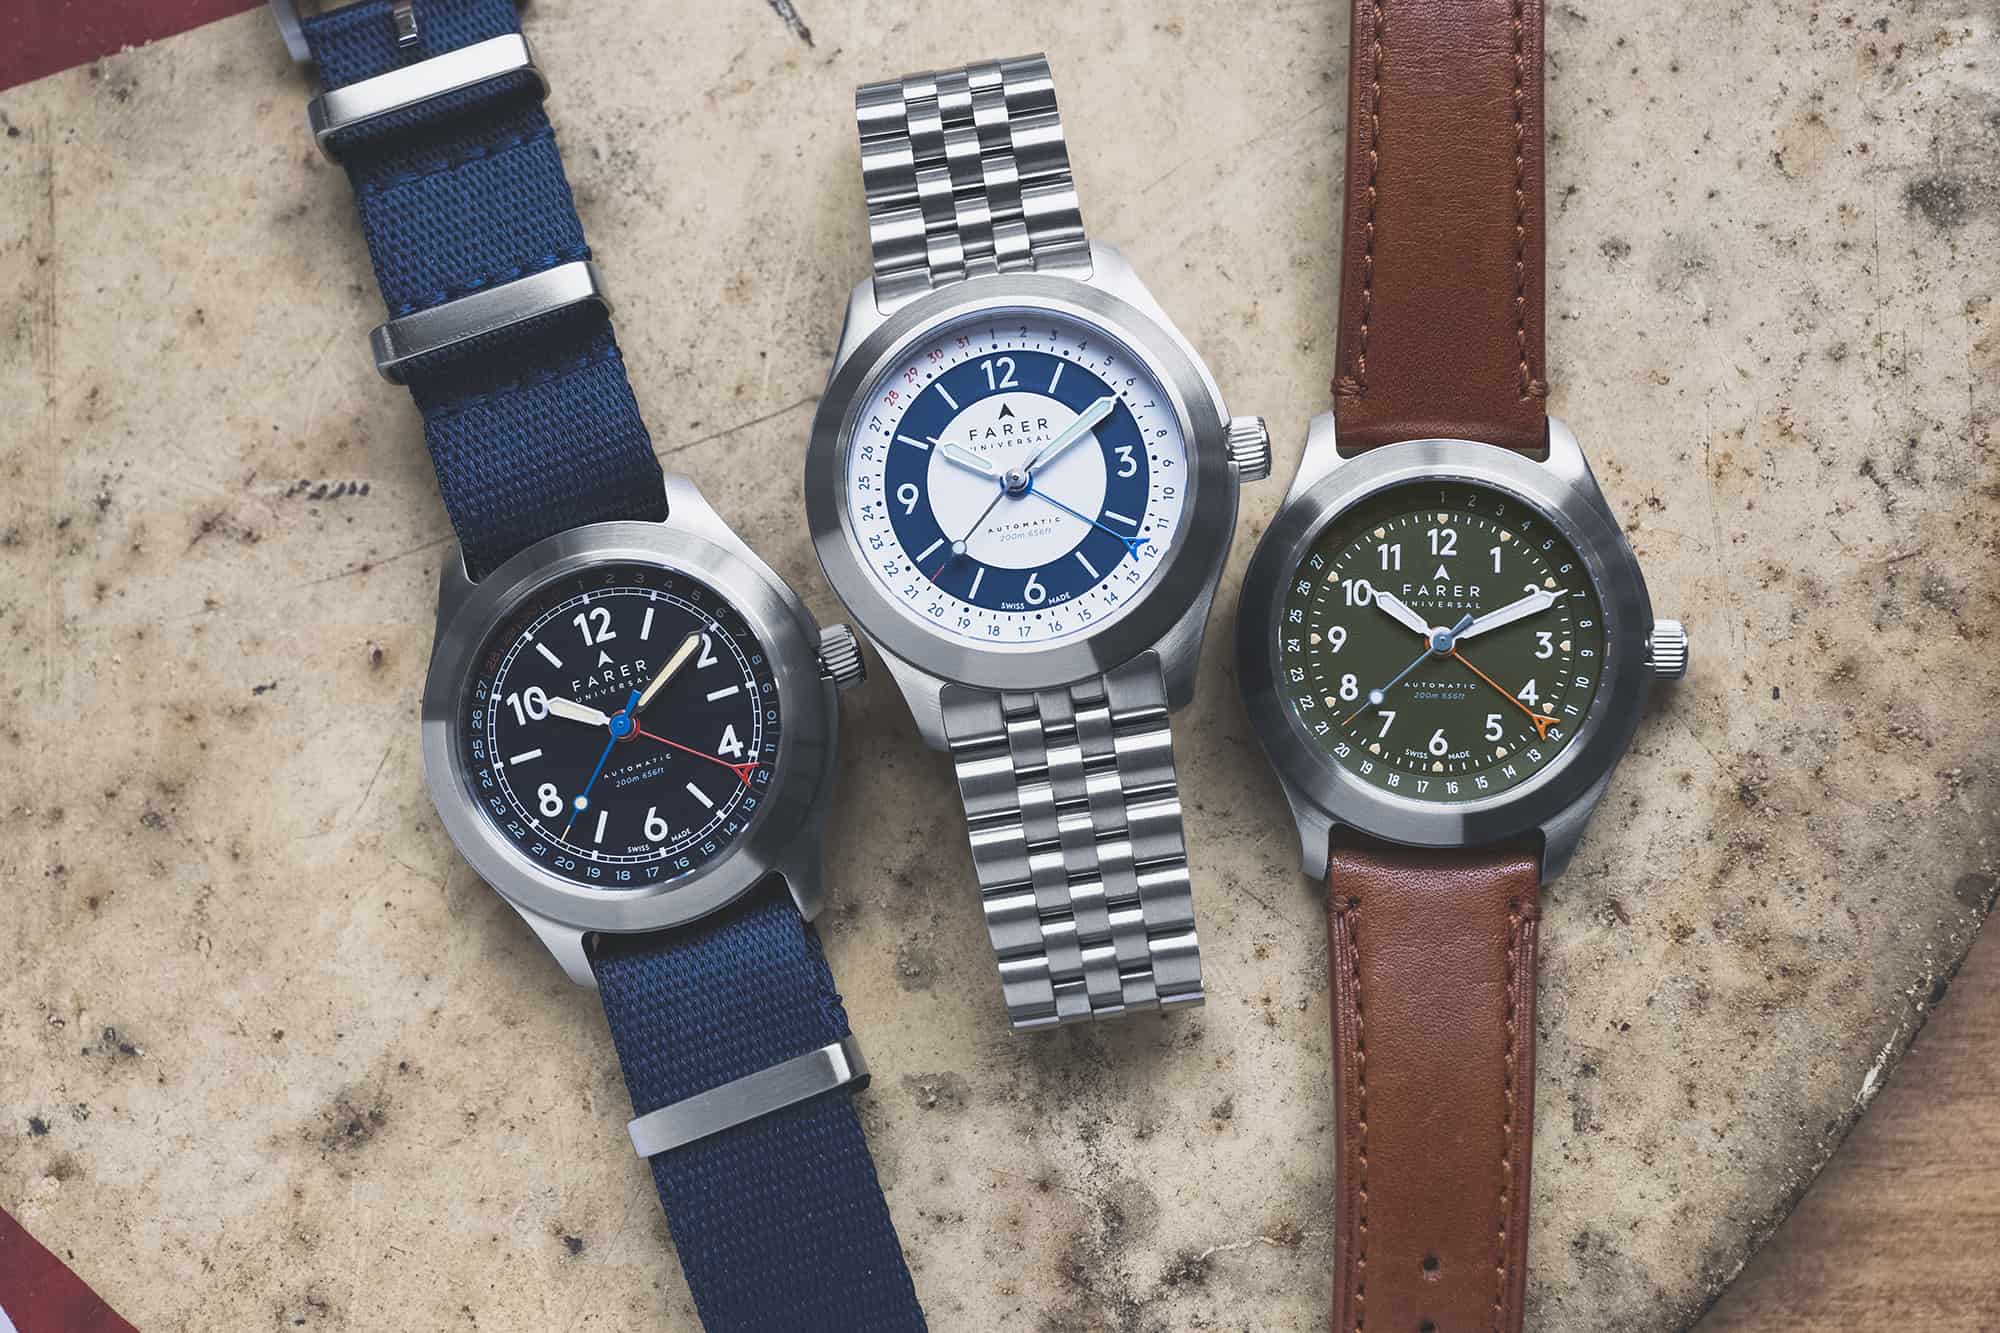 Introducing The New Farer Field Watch Collection